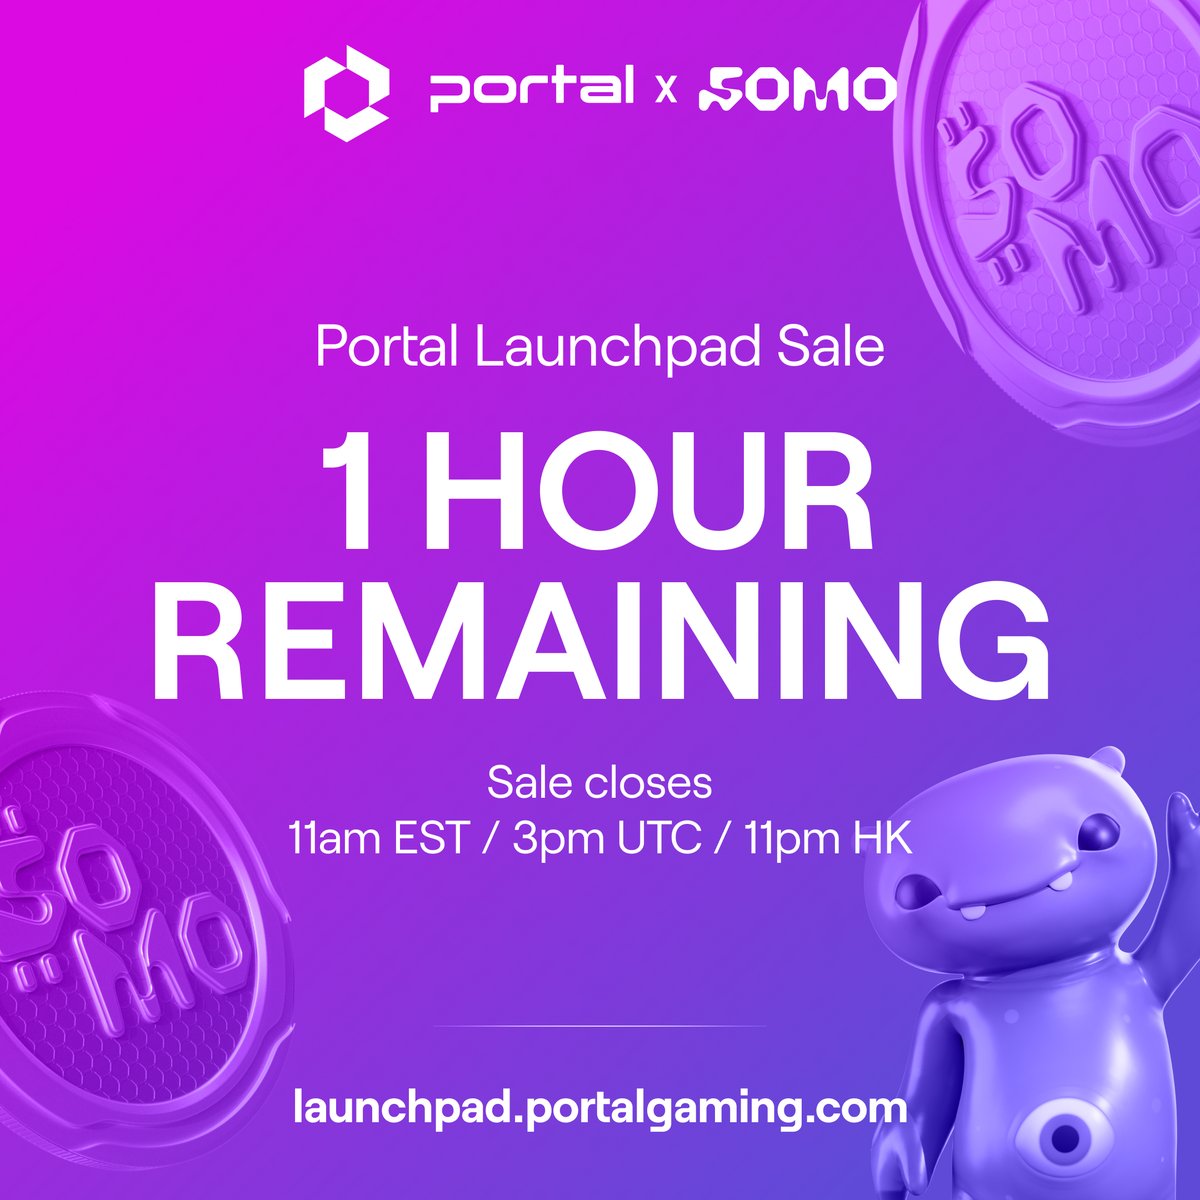 1 hour remaining in the first Portal Launchpad Sale! Portal stakers receive preferential access to buy $SOMO, the token powering the @playsomo universe. For the hottest launches in Web3: launchpad.portalgaming.com 📈